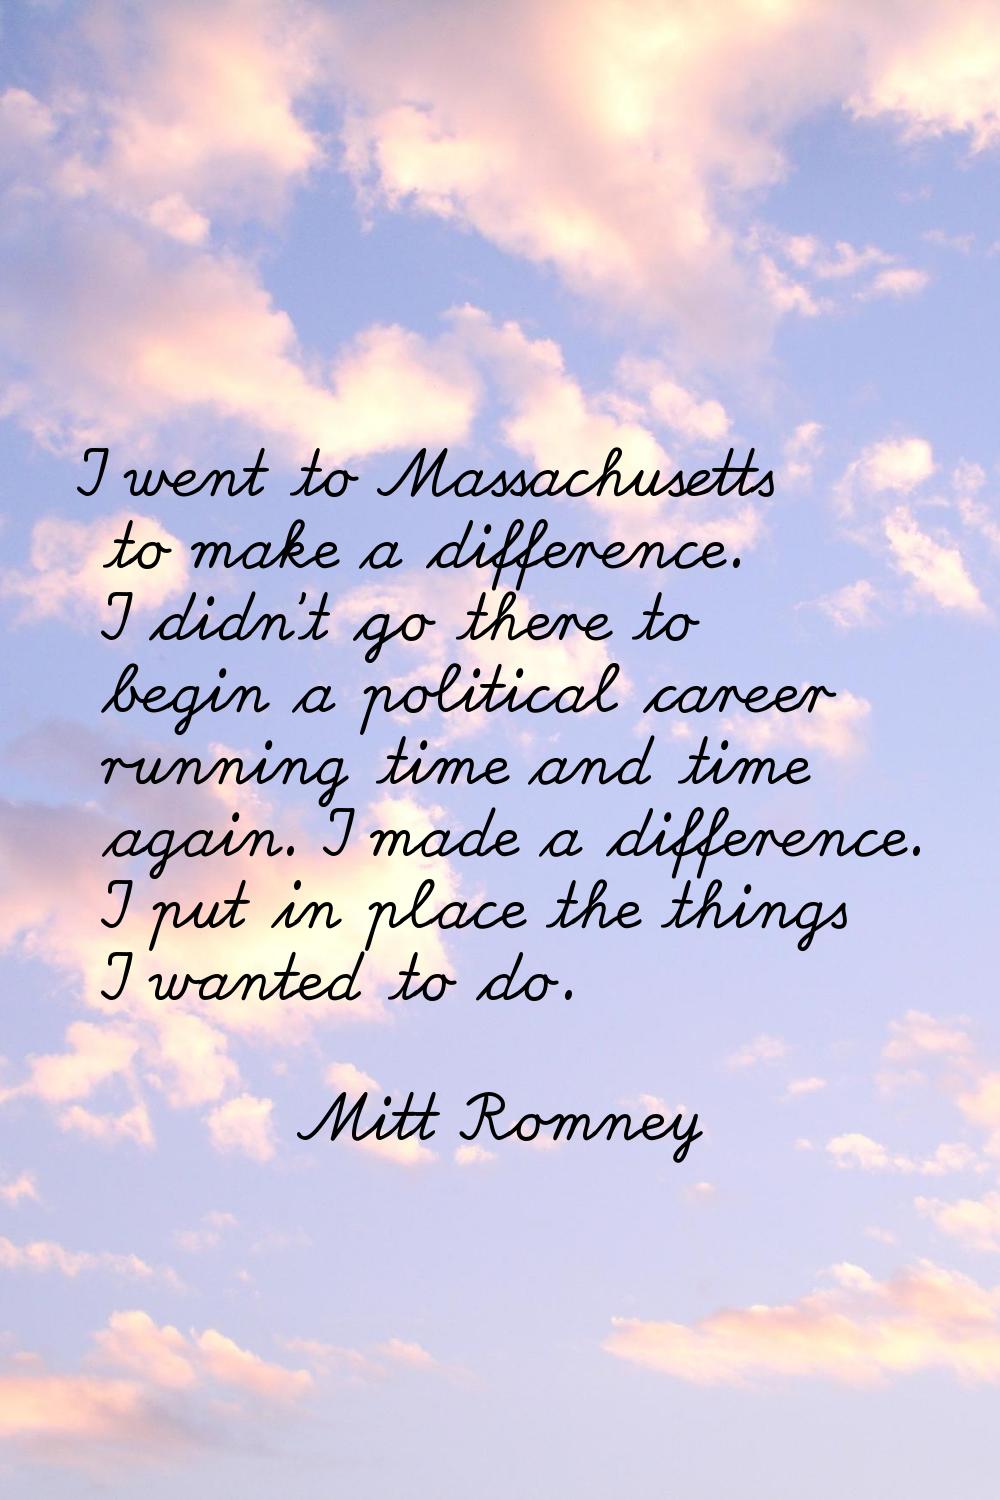 I went to Massachusetts to make a difference. I didn't go there to begin a political career running